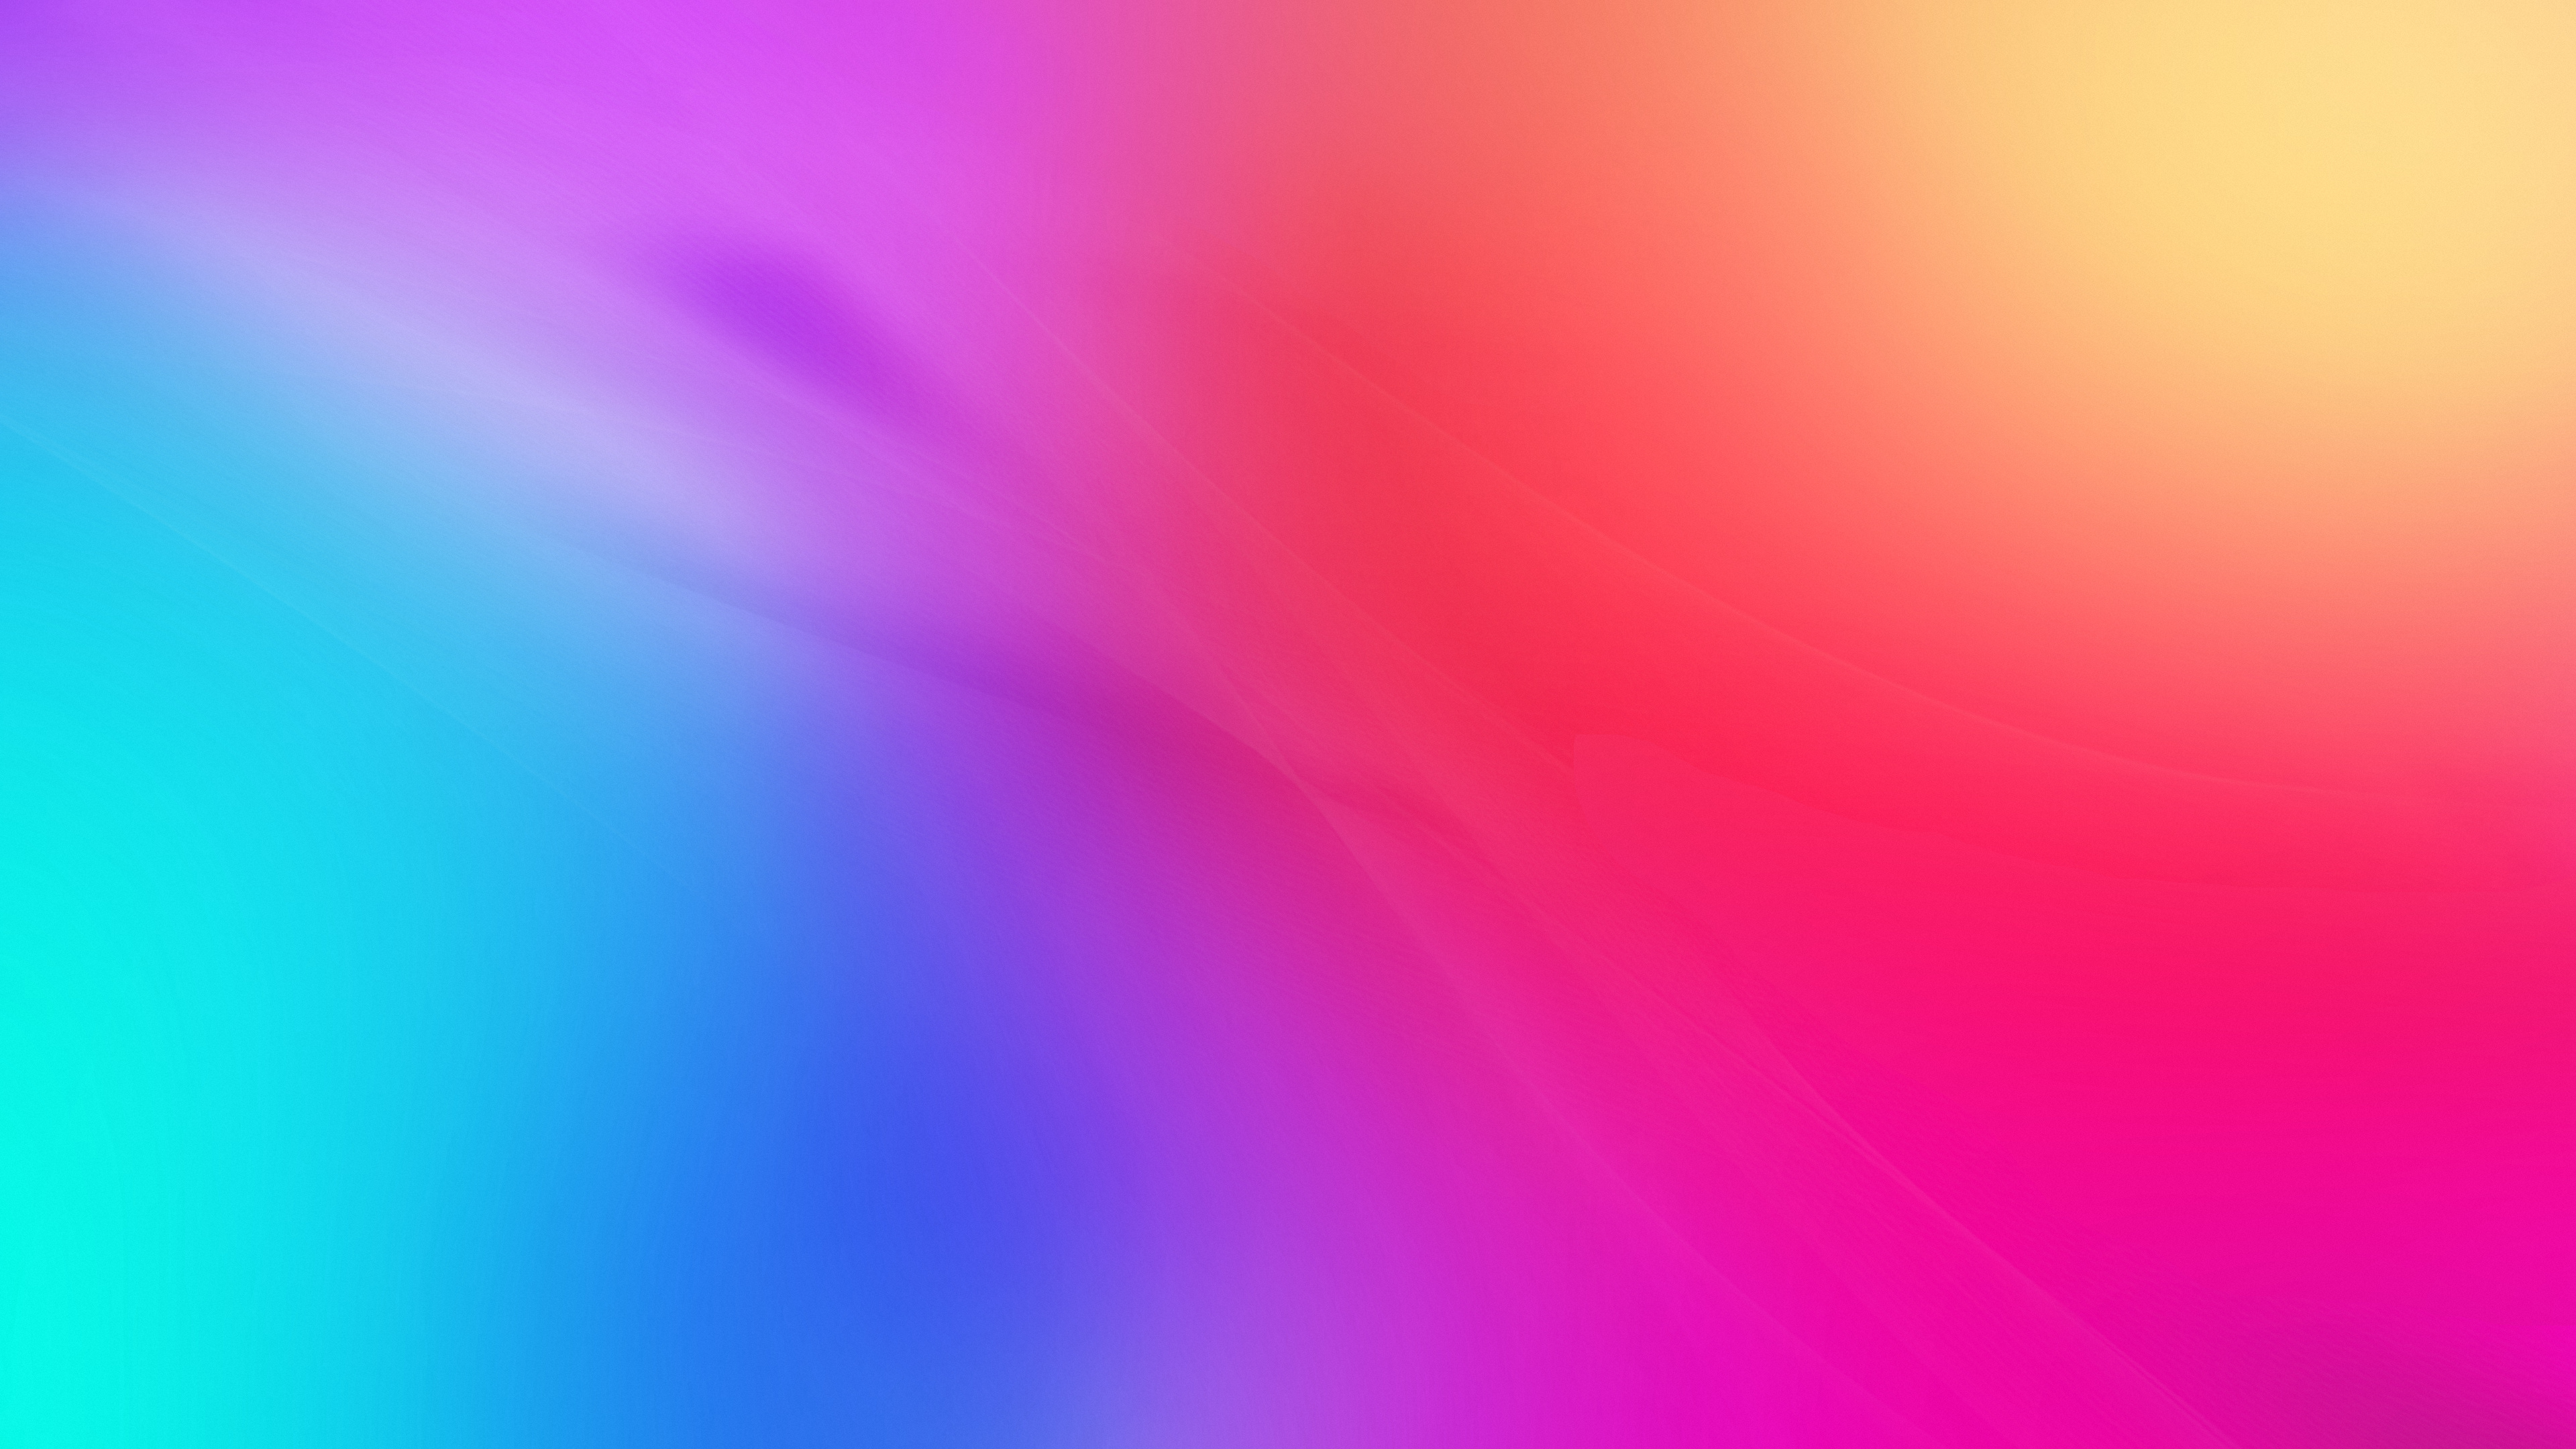 Backdrop: Colorful gradient, Multicolor, Vibrant, Abstract, Smooth transition, Blue, Red, Violet. 3840x2160 4K Wallpaper.